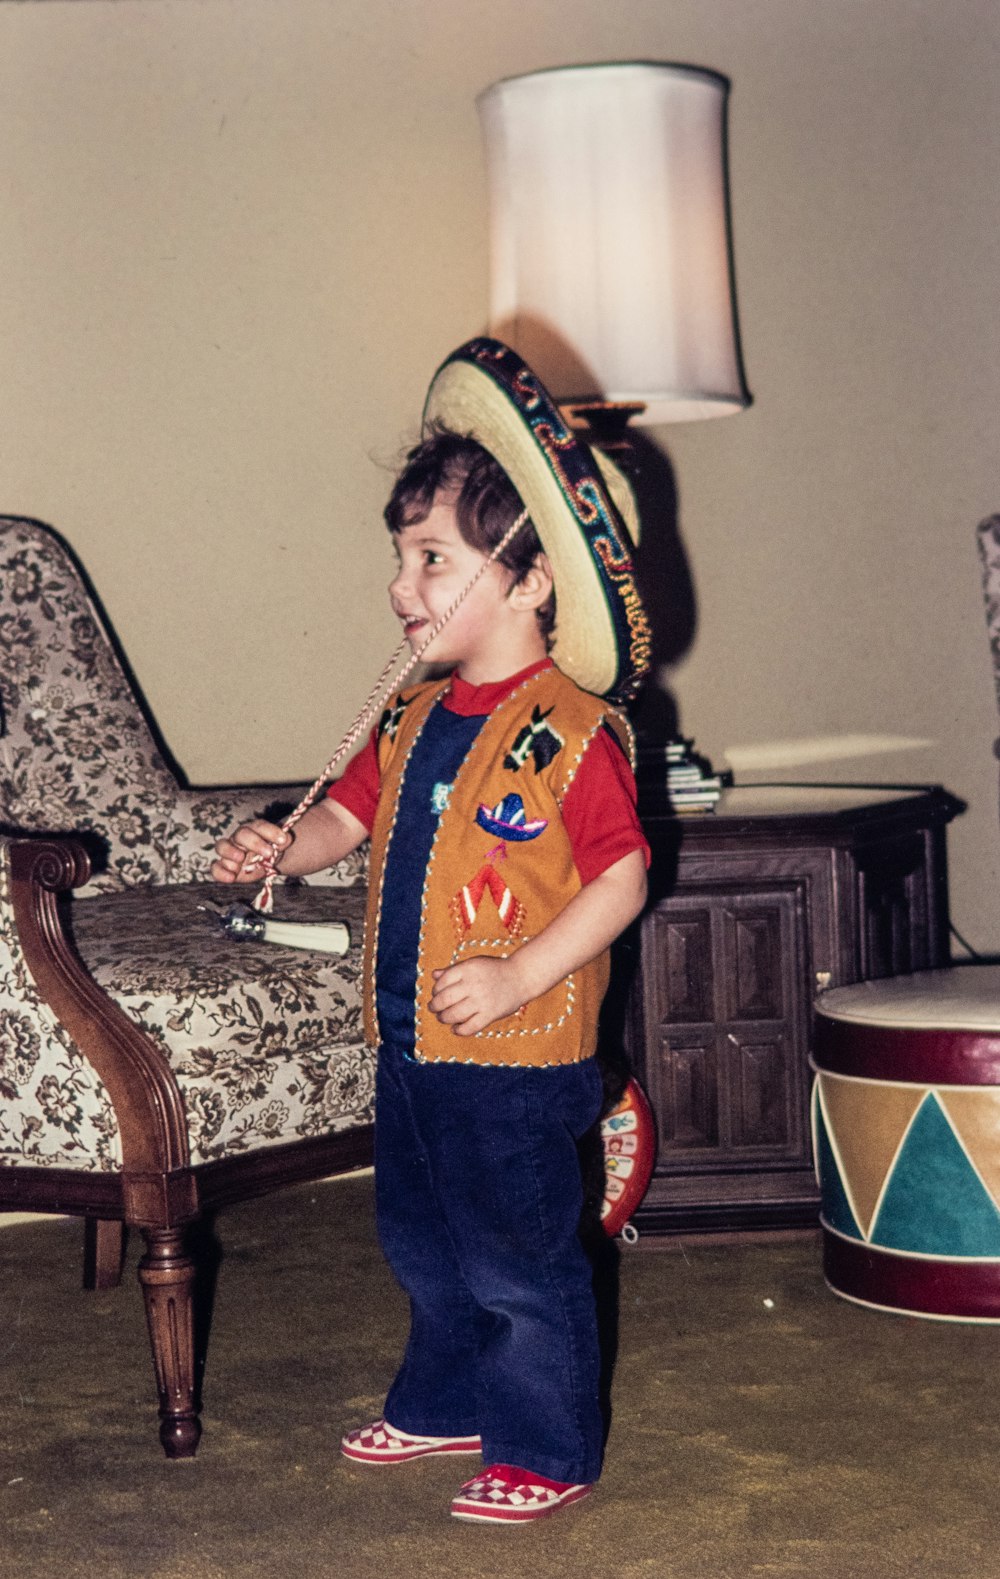 a young boy wearing a sombrero standing in a living room